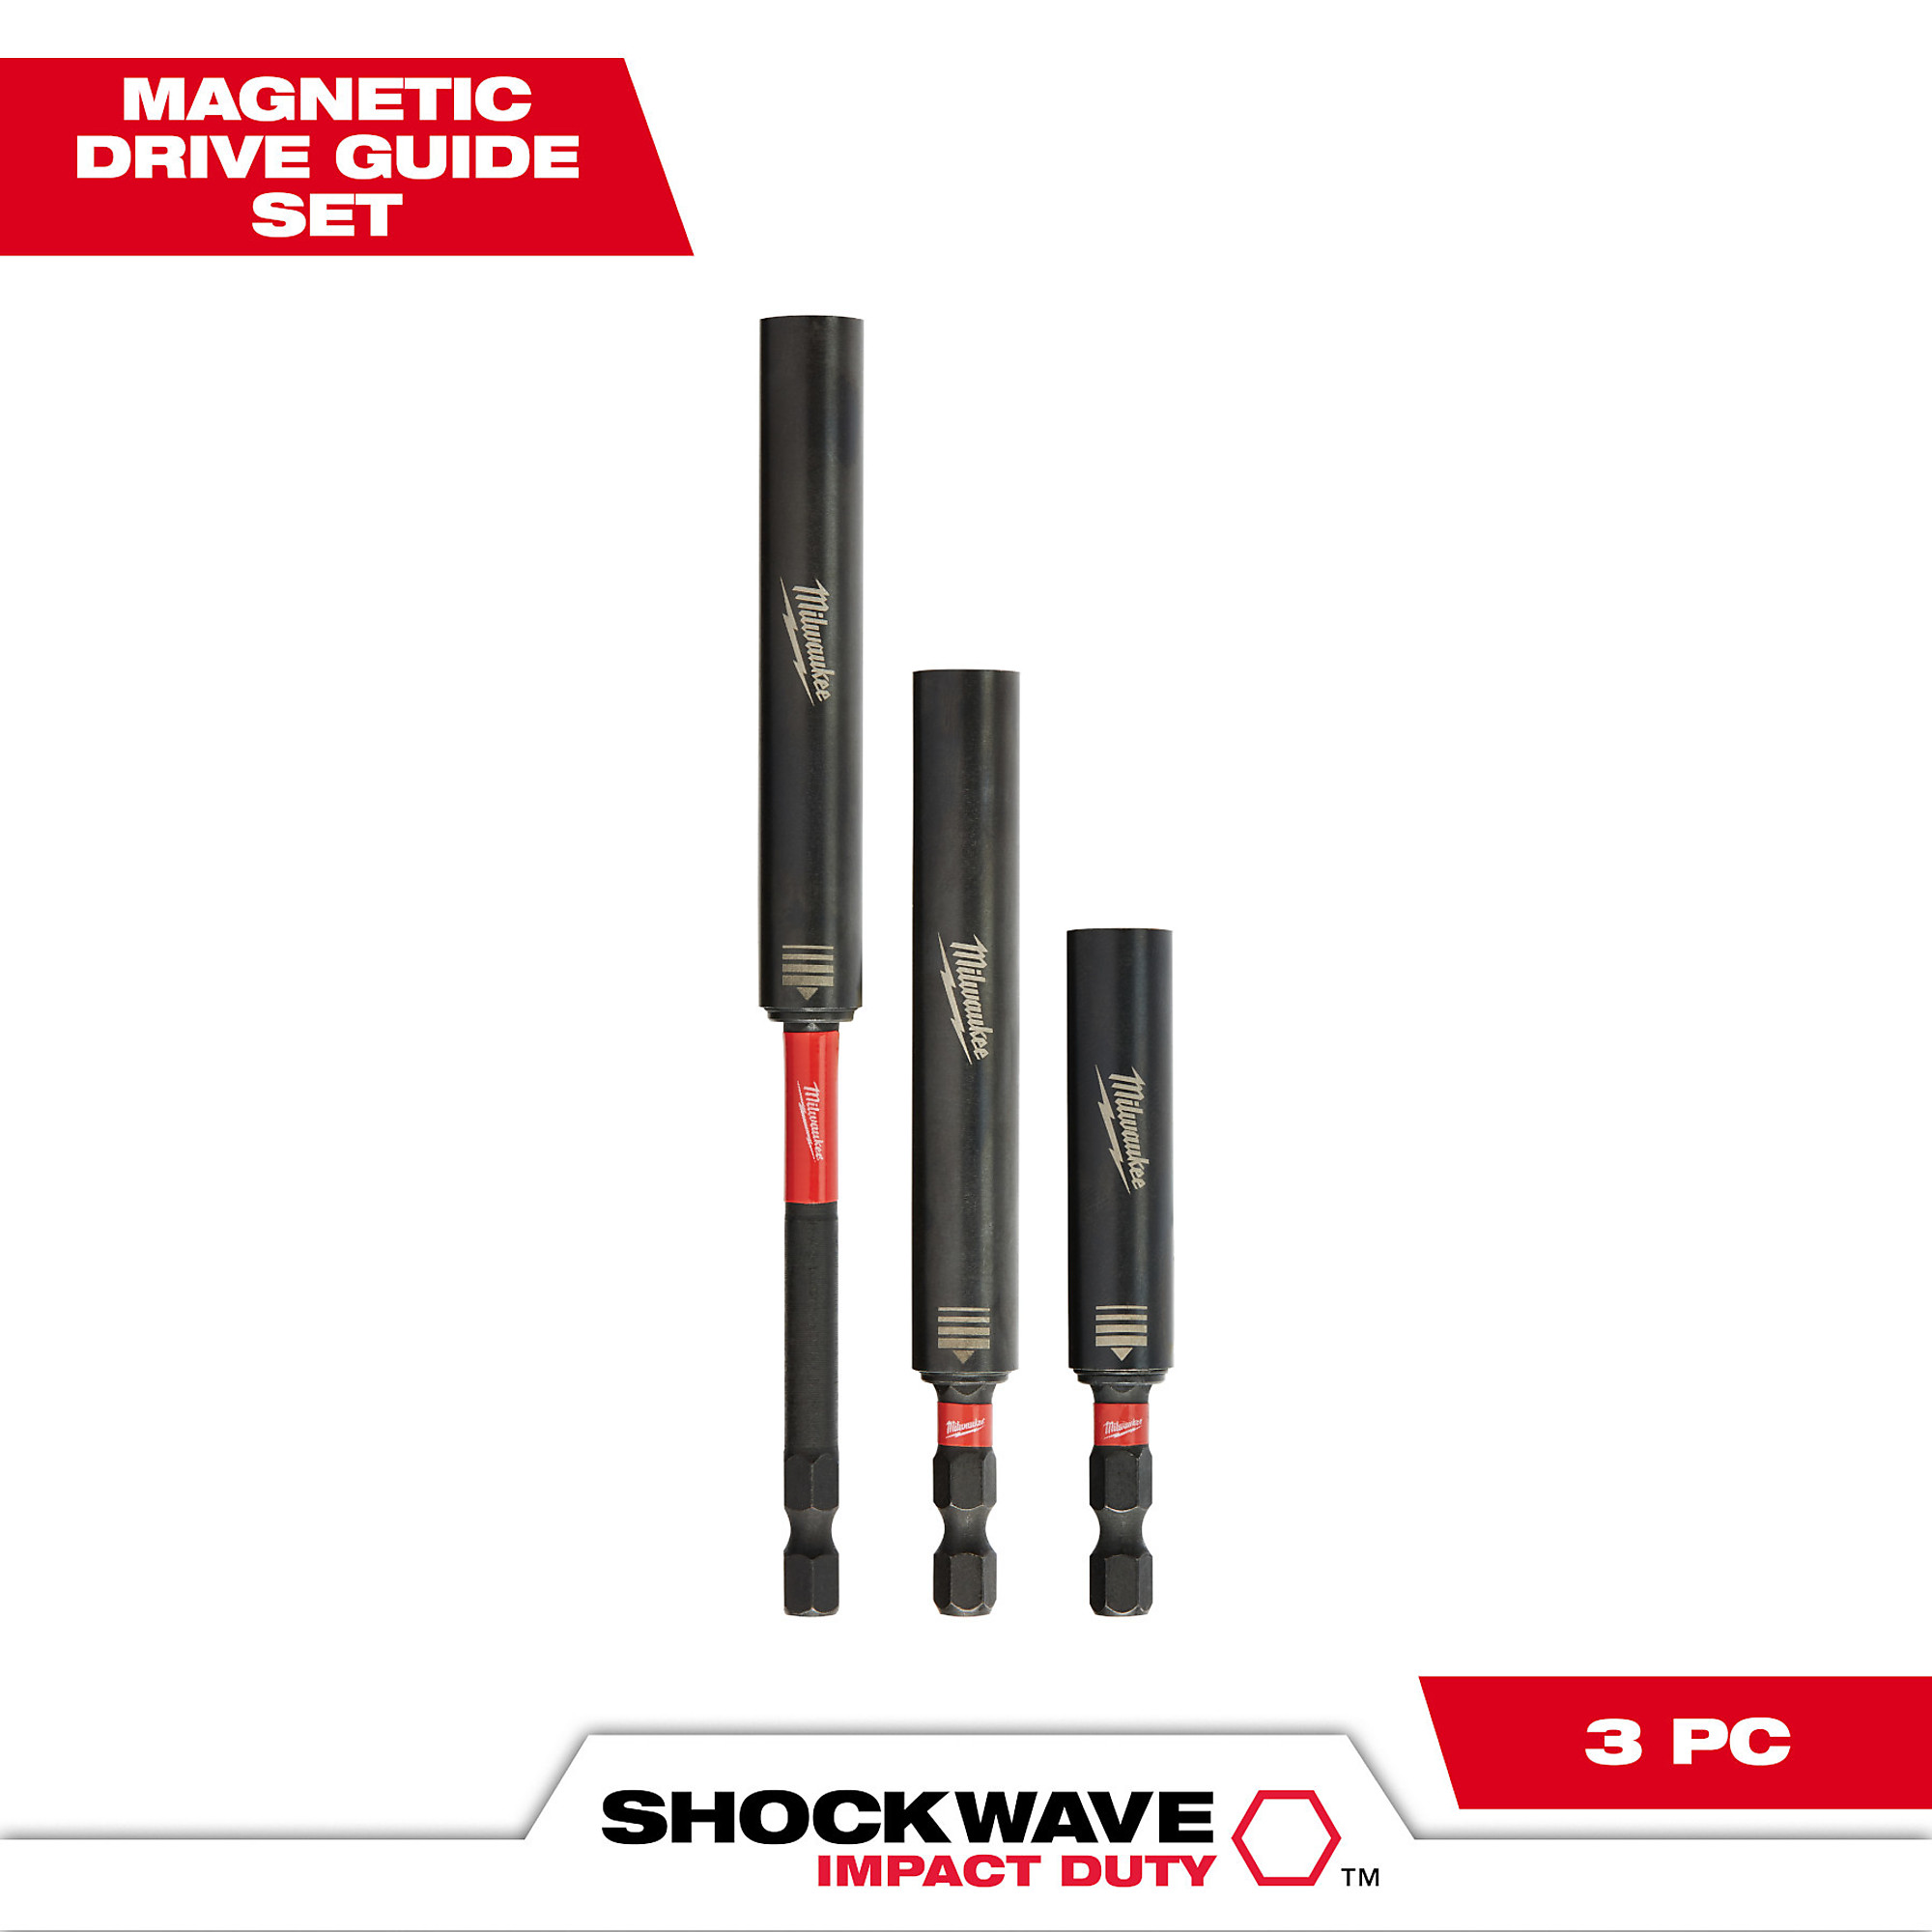 Milwaukee Shockwave Impact Duty Magnetic Drive Guides, 3-Piece Set, Model 48-32-4519